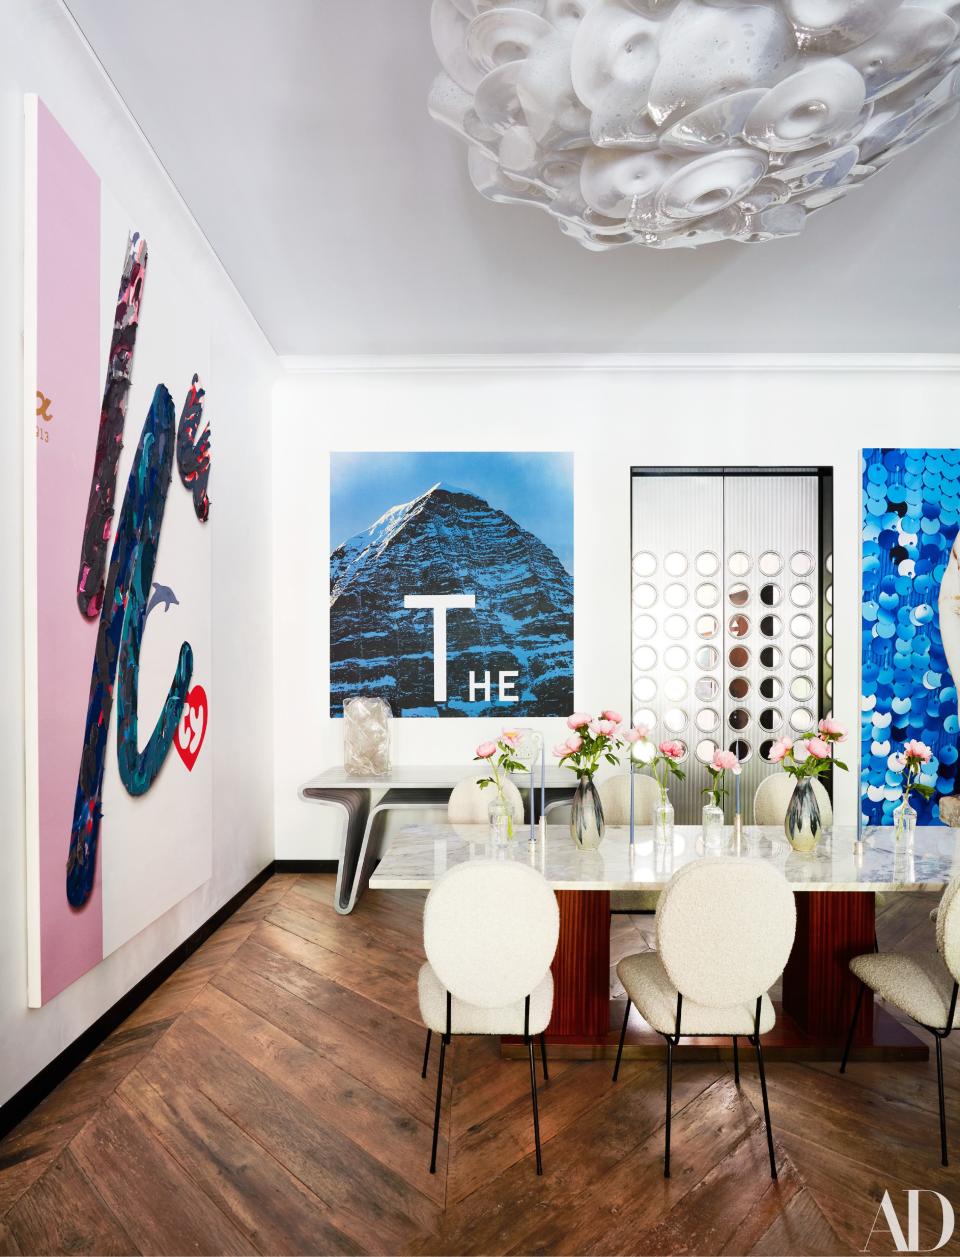 Lighting by Jeff Zimmerman hangs above the vintage Rene-Jean Caillette dining table and Joaquim Tenreiro chairs. Paintings by Laura Owens (left) and Ed Ruscha.